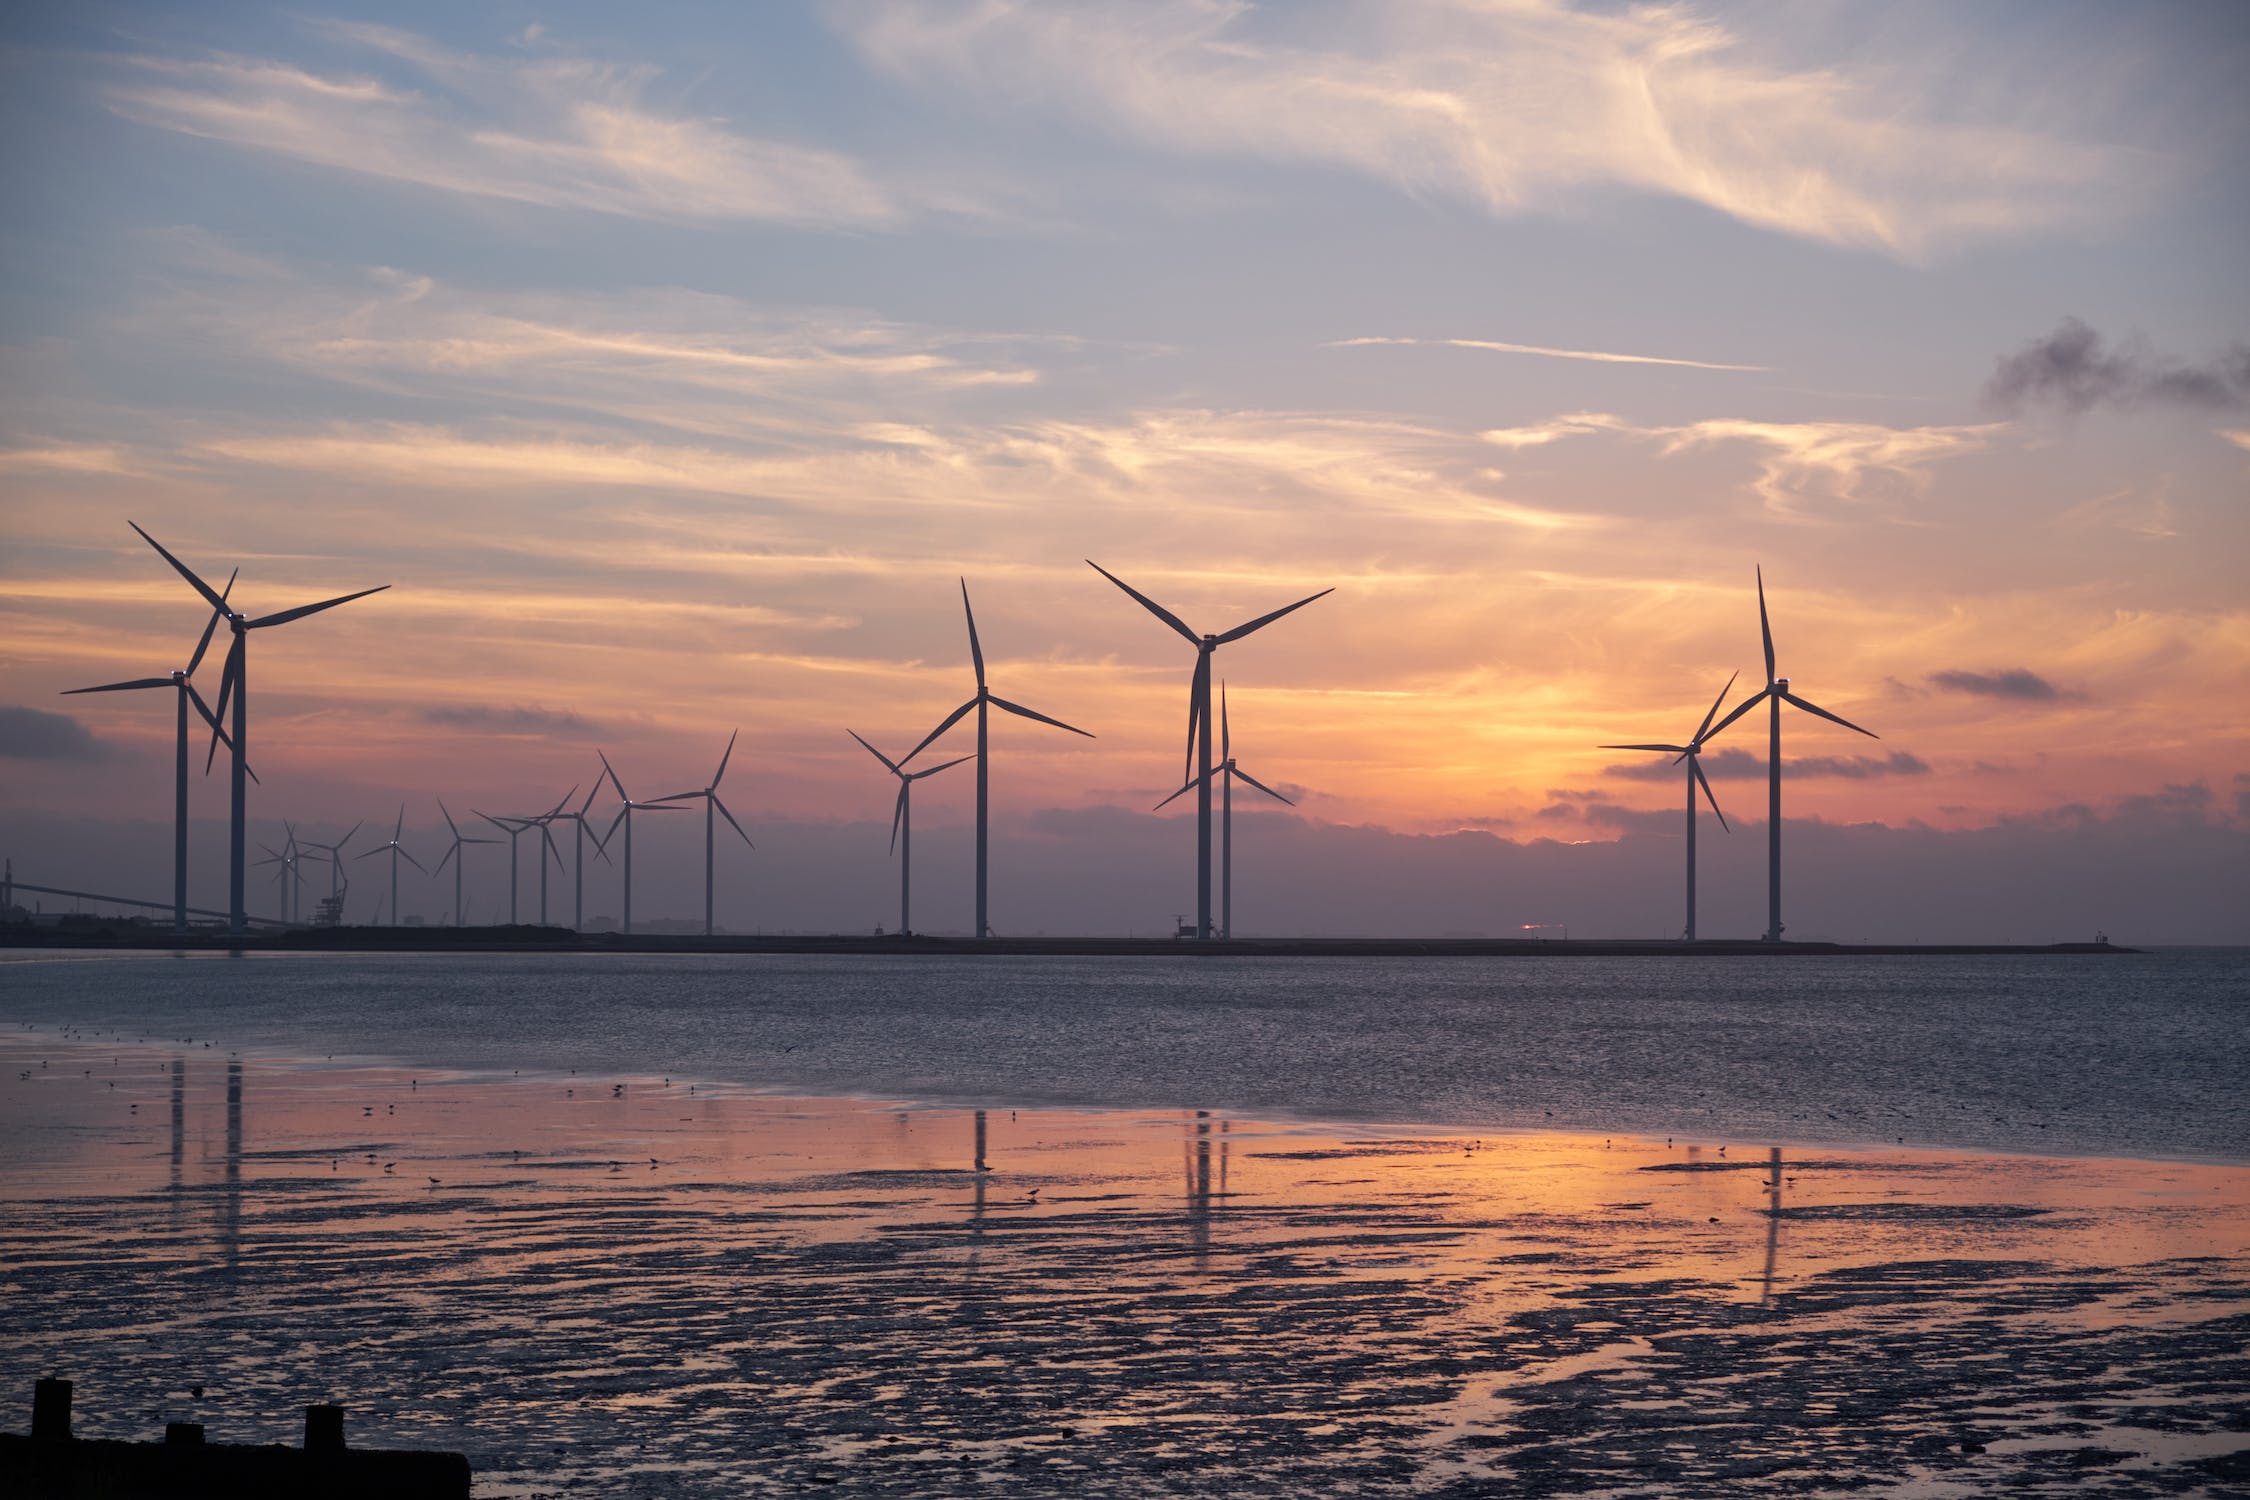 A multitude of windmills from a distance set against a sunset